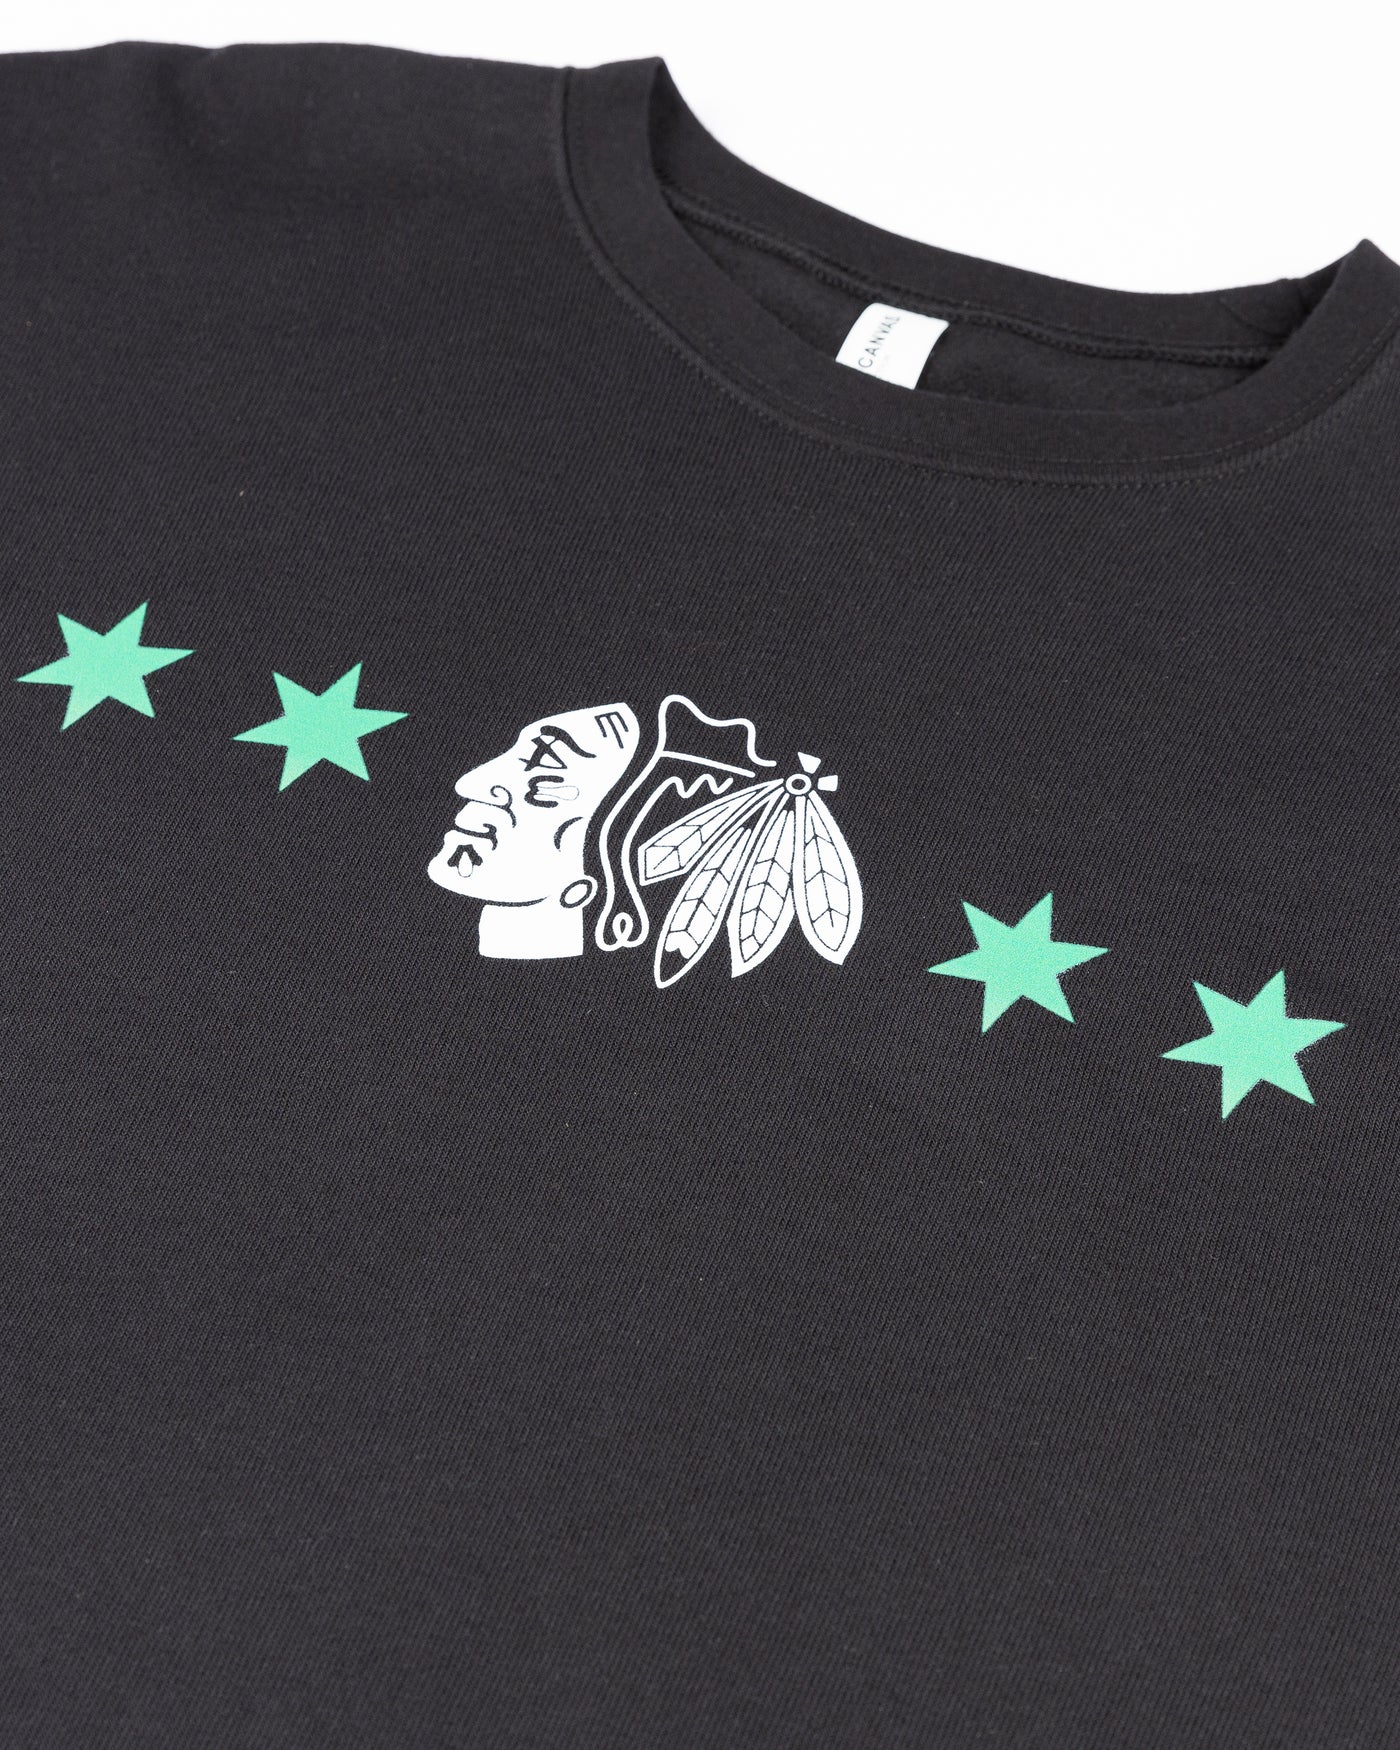 black crewneck with Chicago Blackhawks primary logo and four stars inspired design for St. Patrick's Day - detail lay flat